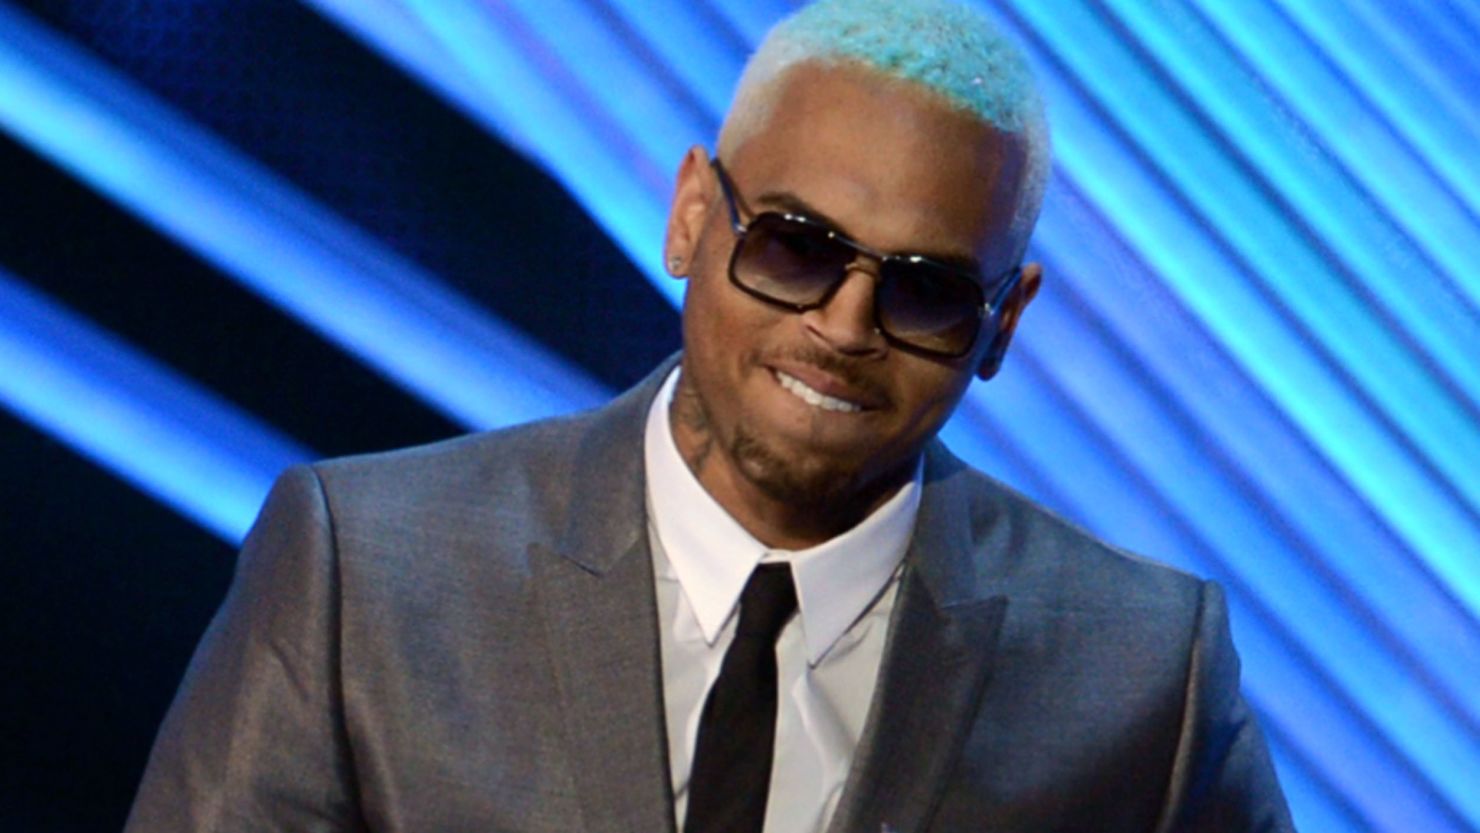 Singer Chris Brown accepts the award for Best Male Video onstage during the 2012 MTV Video Music Awards at Staples Center on September 6, 2012 in Los Angeles, California.